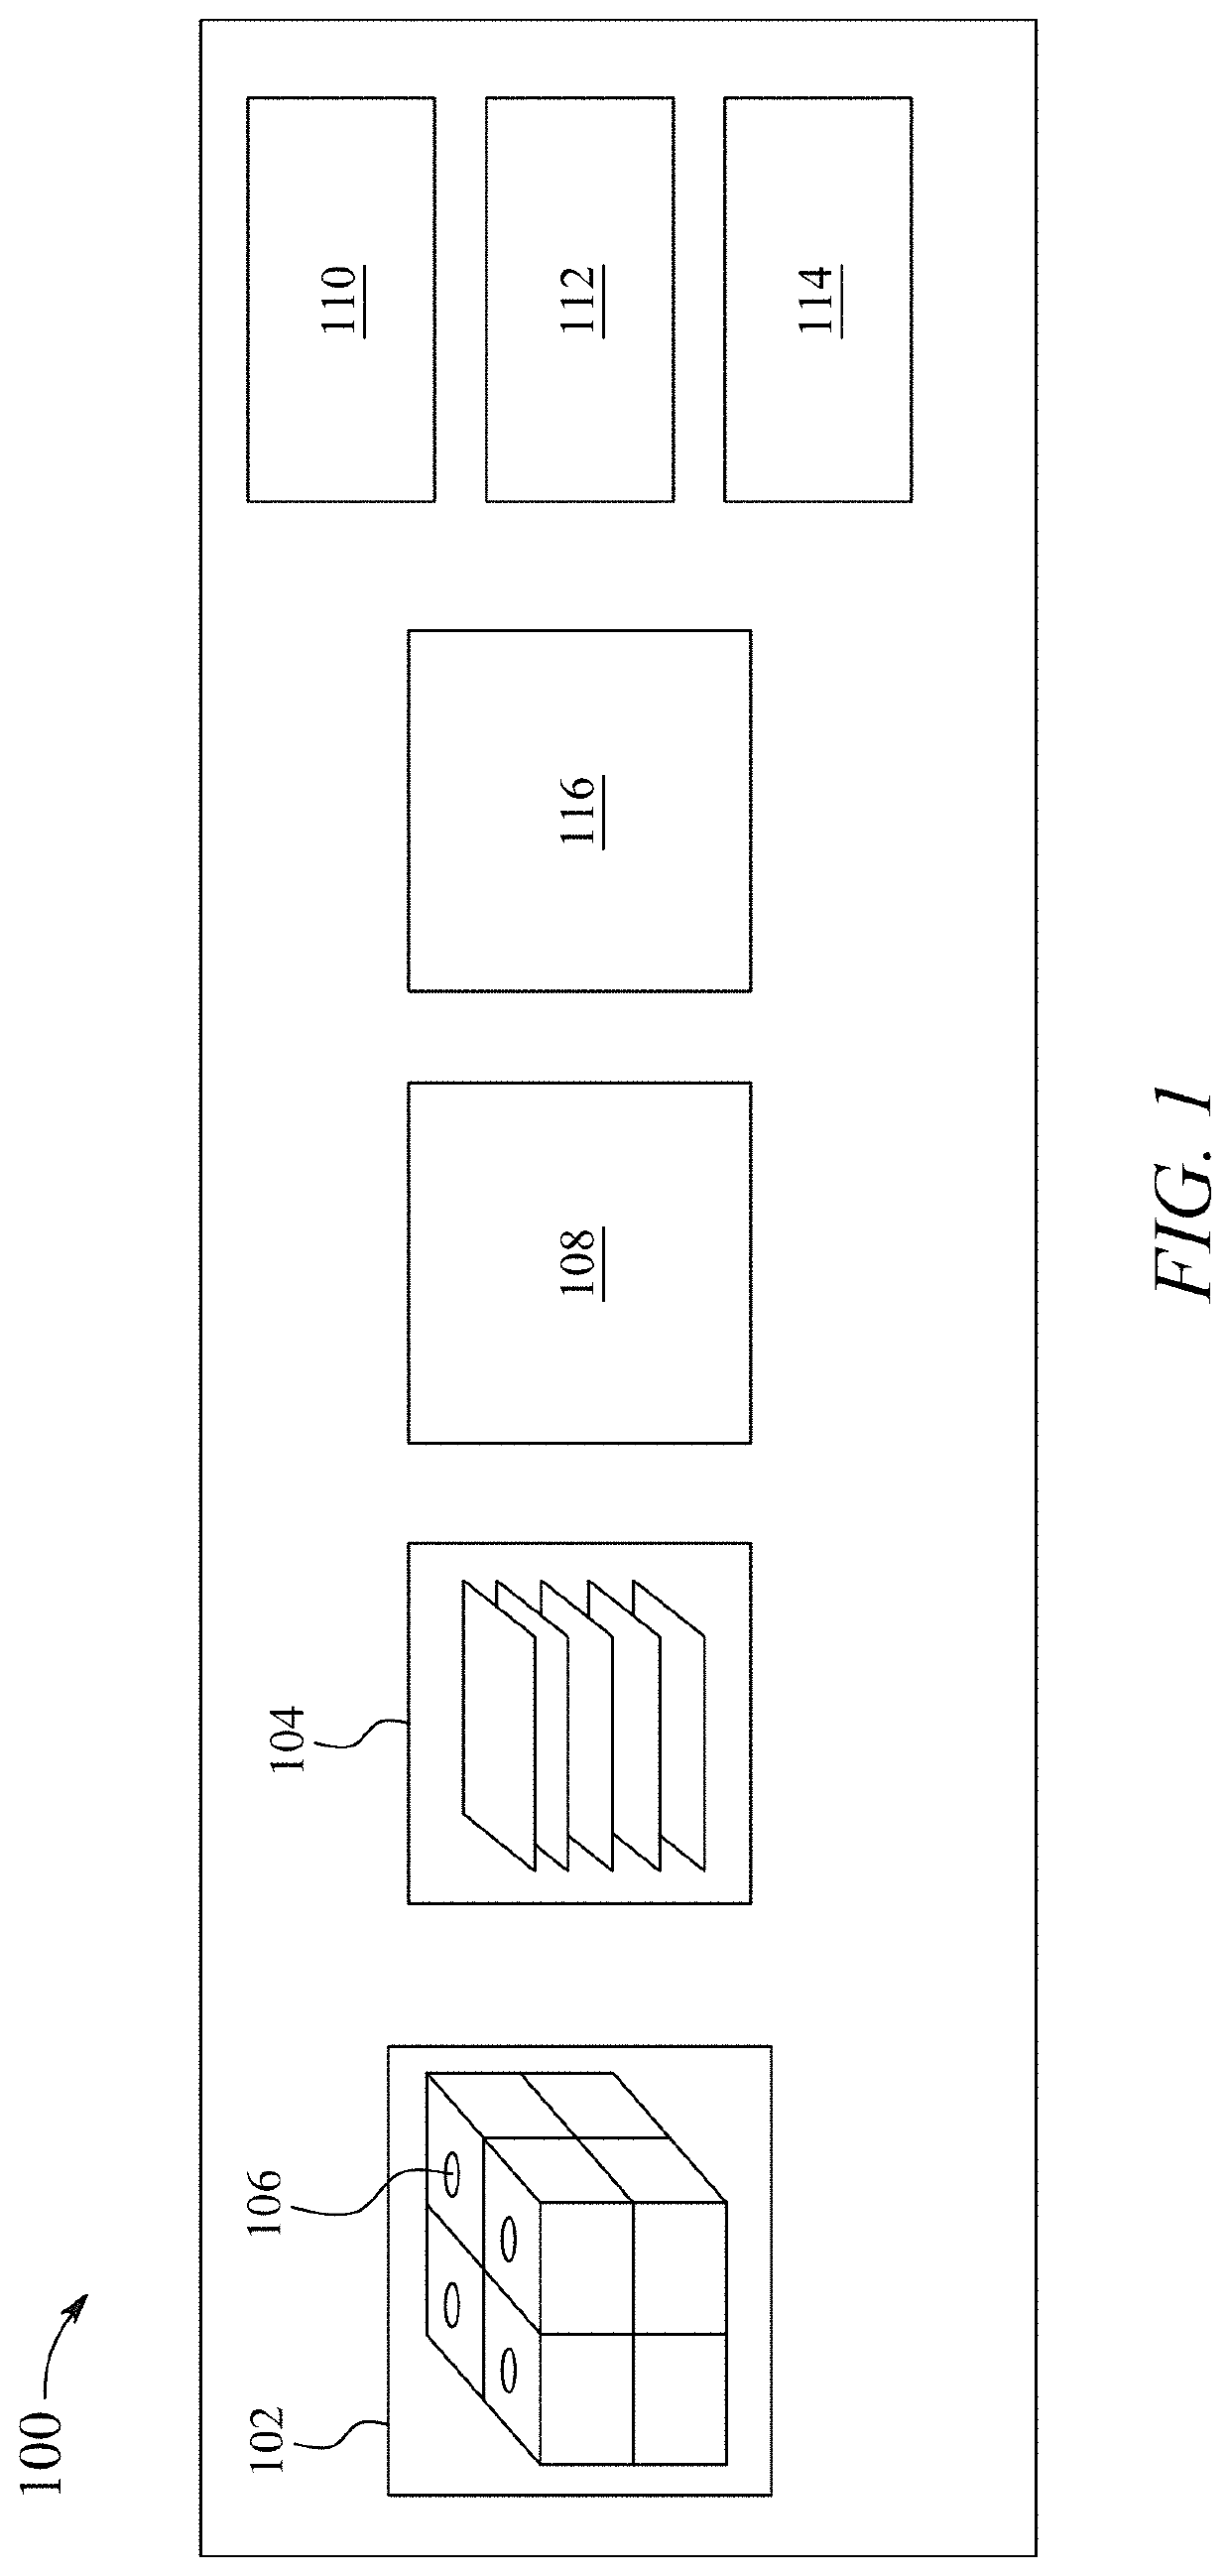 System and method for analysis of chip and burr formation in drilled fiber reinforced plastic composites using image processing